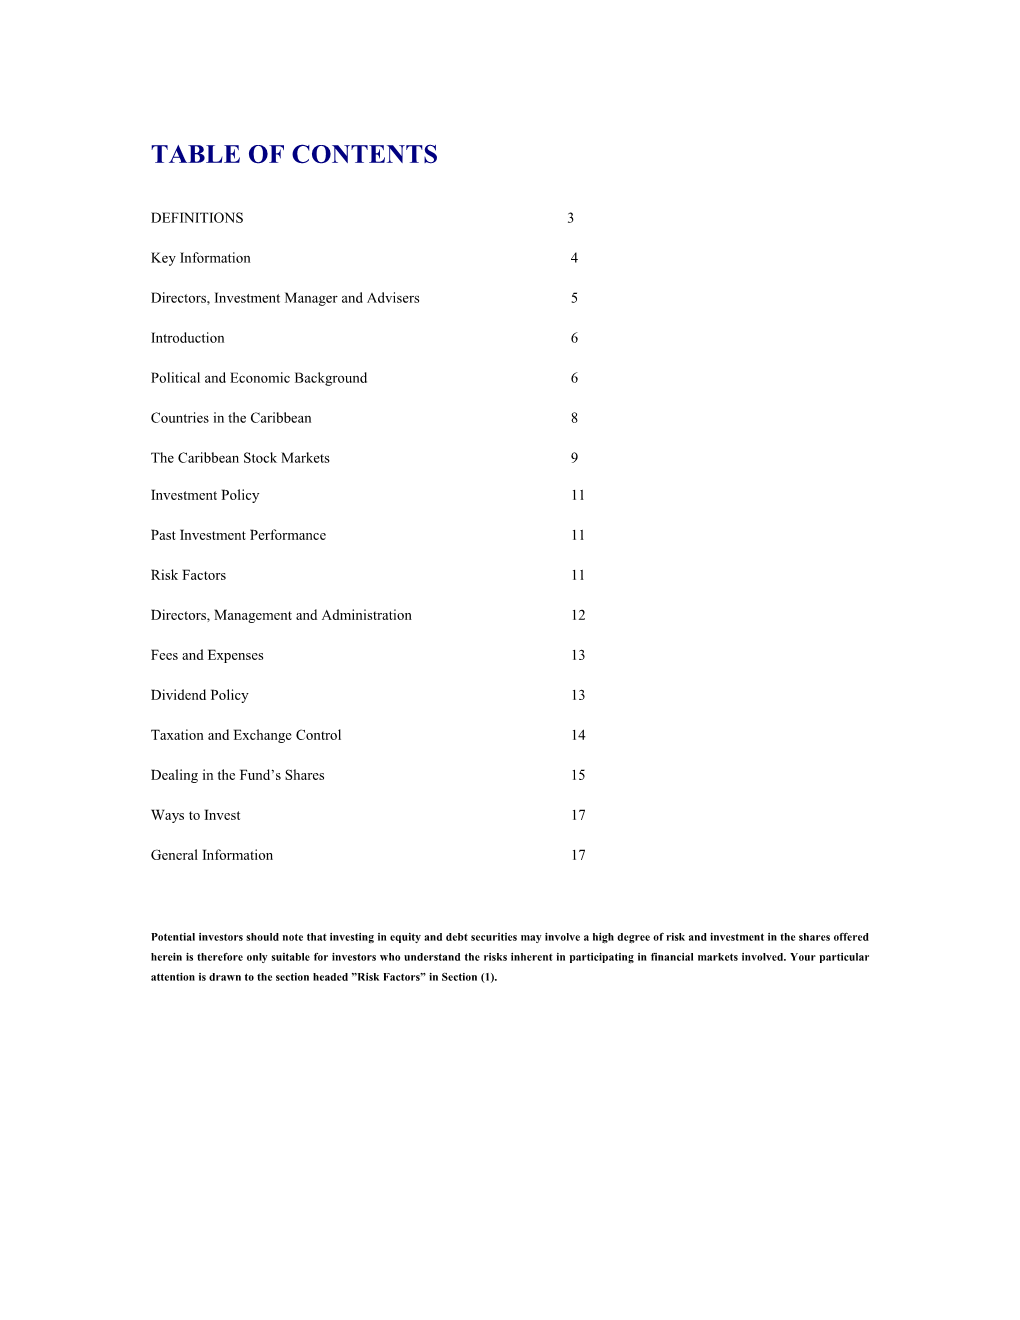 Table of Contents s197